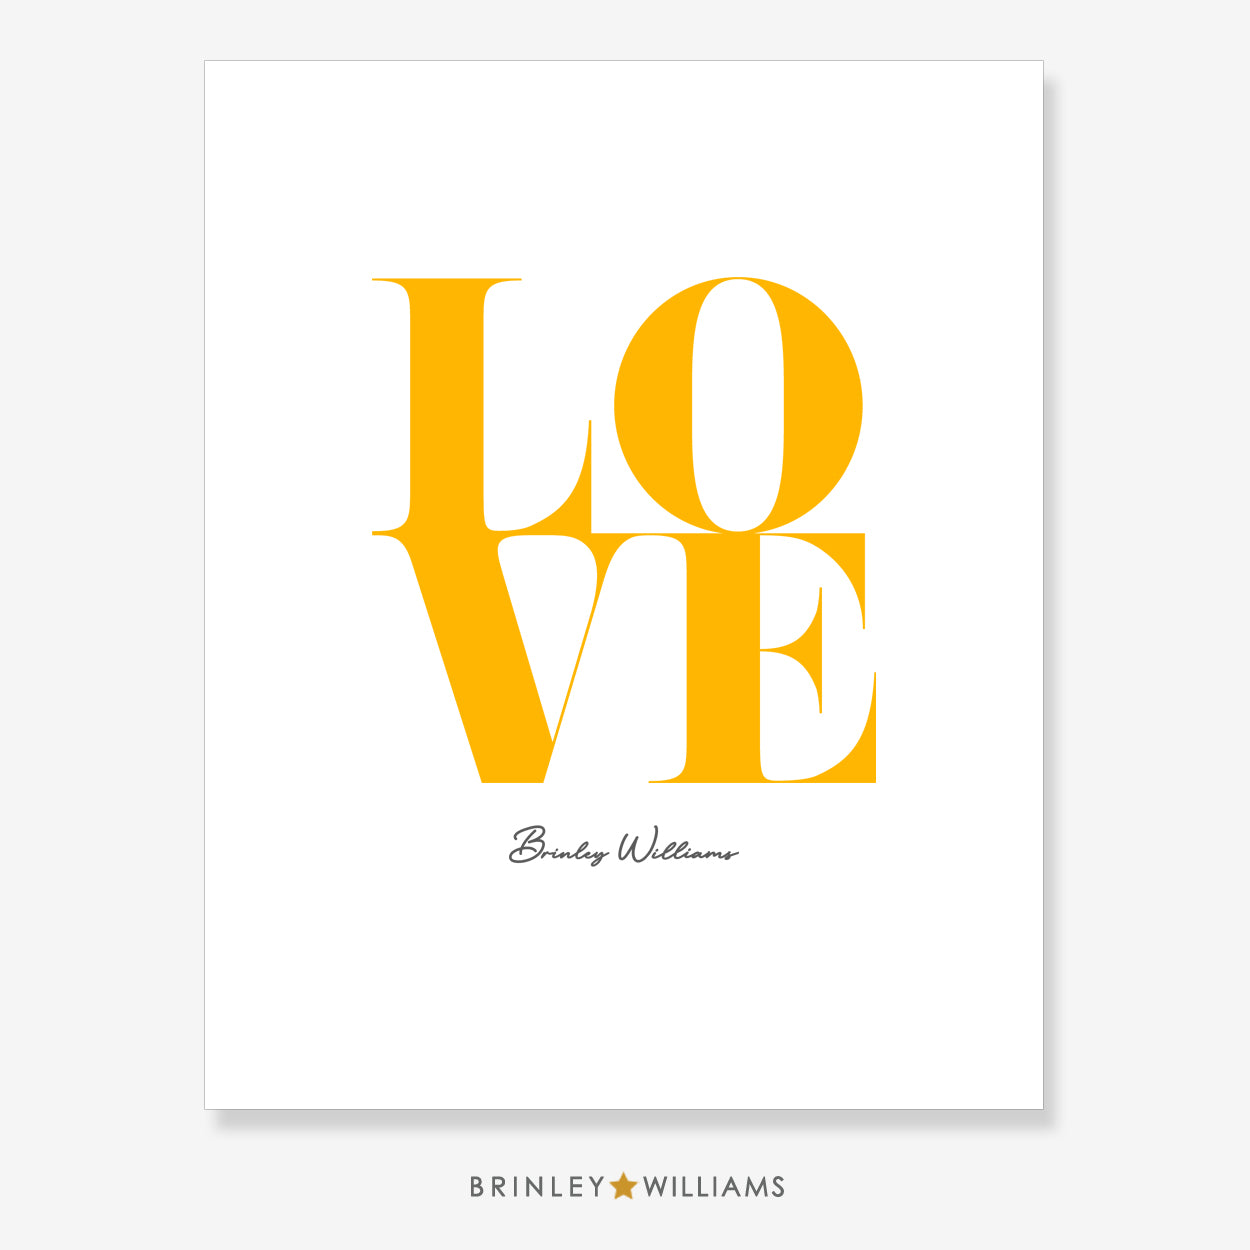 Love Square Wall Art Poster - Yellow